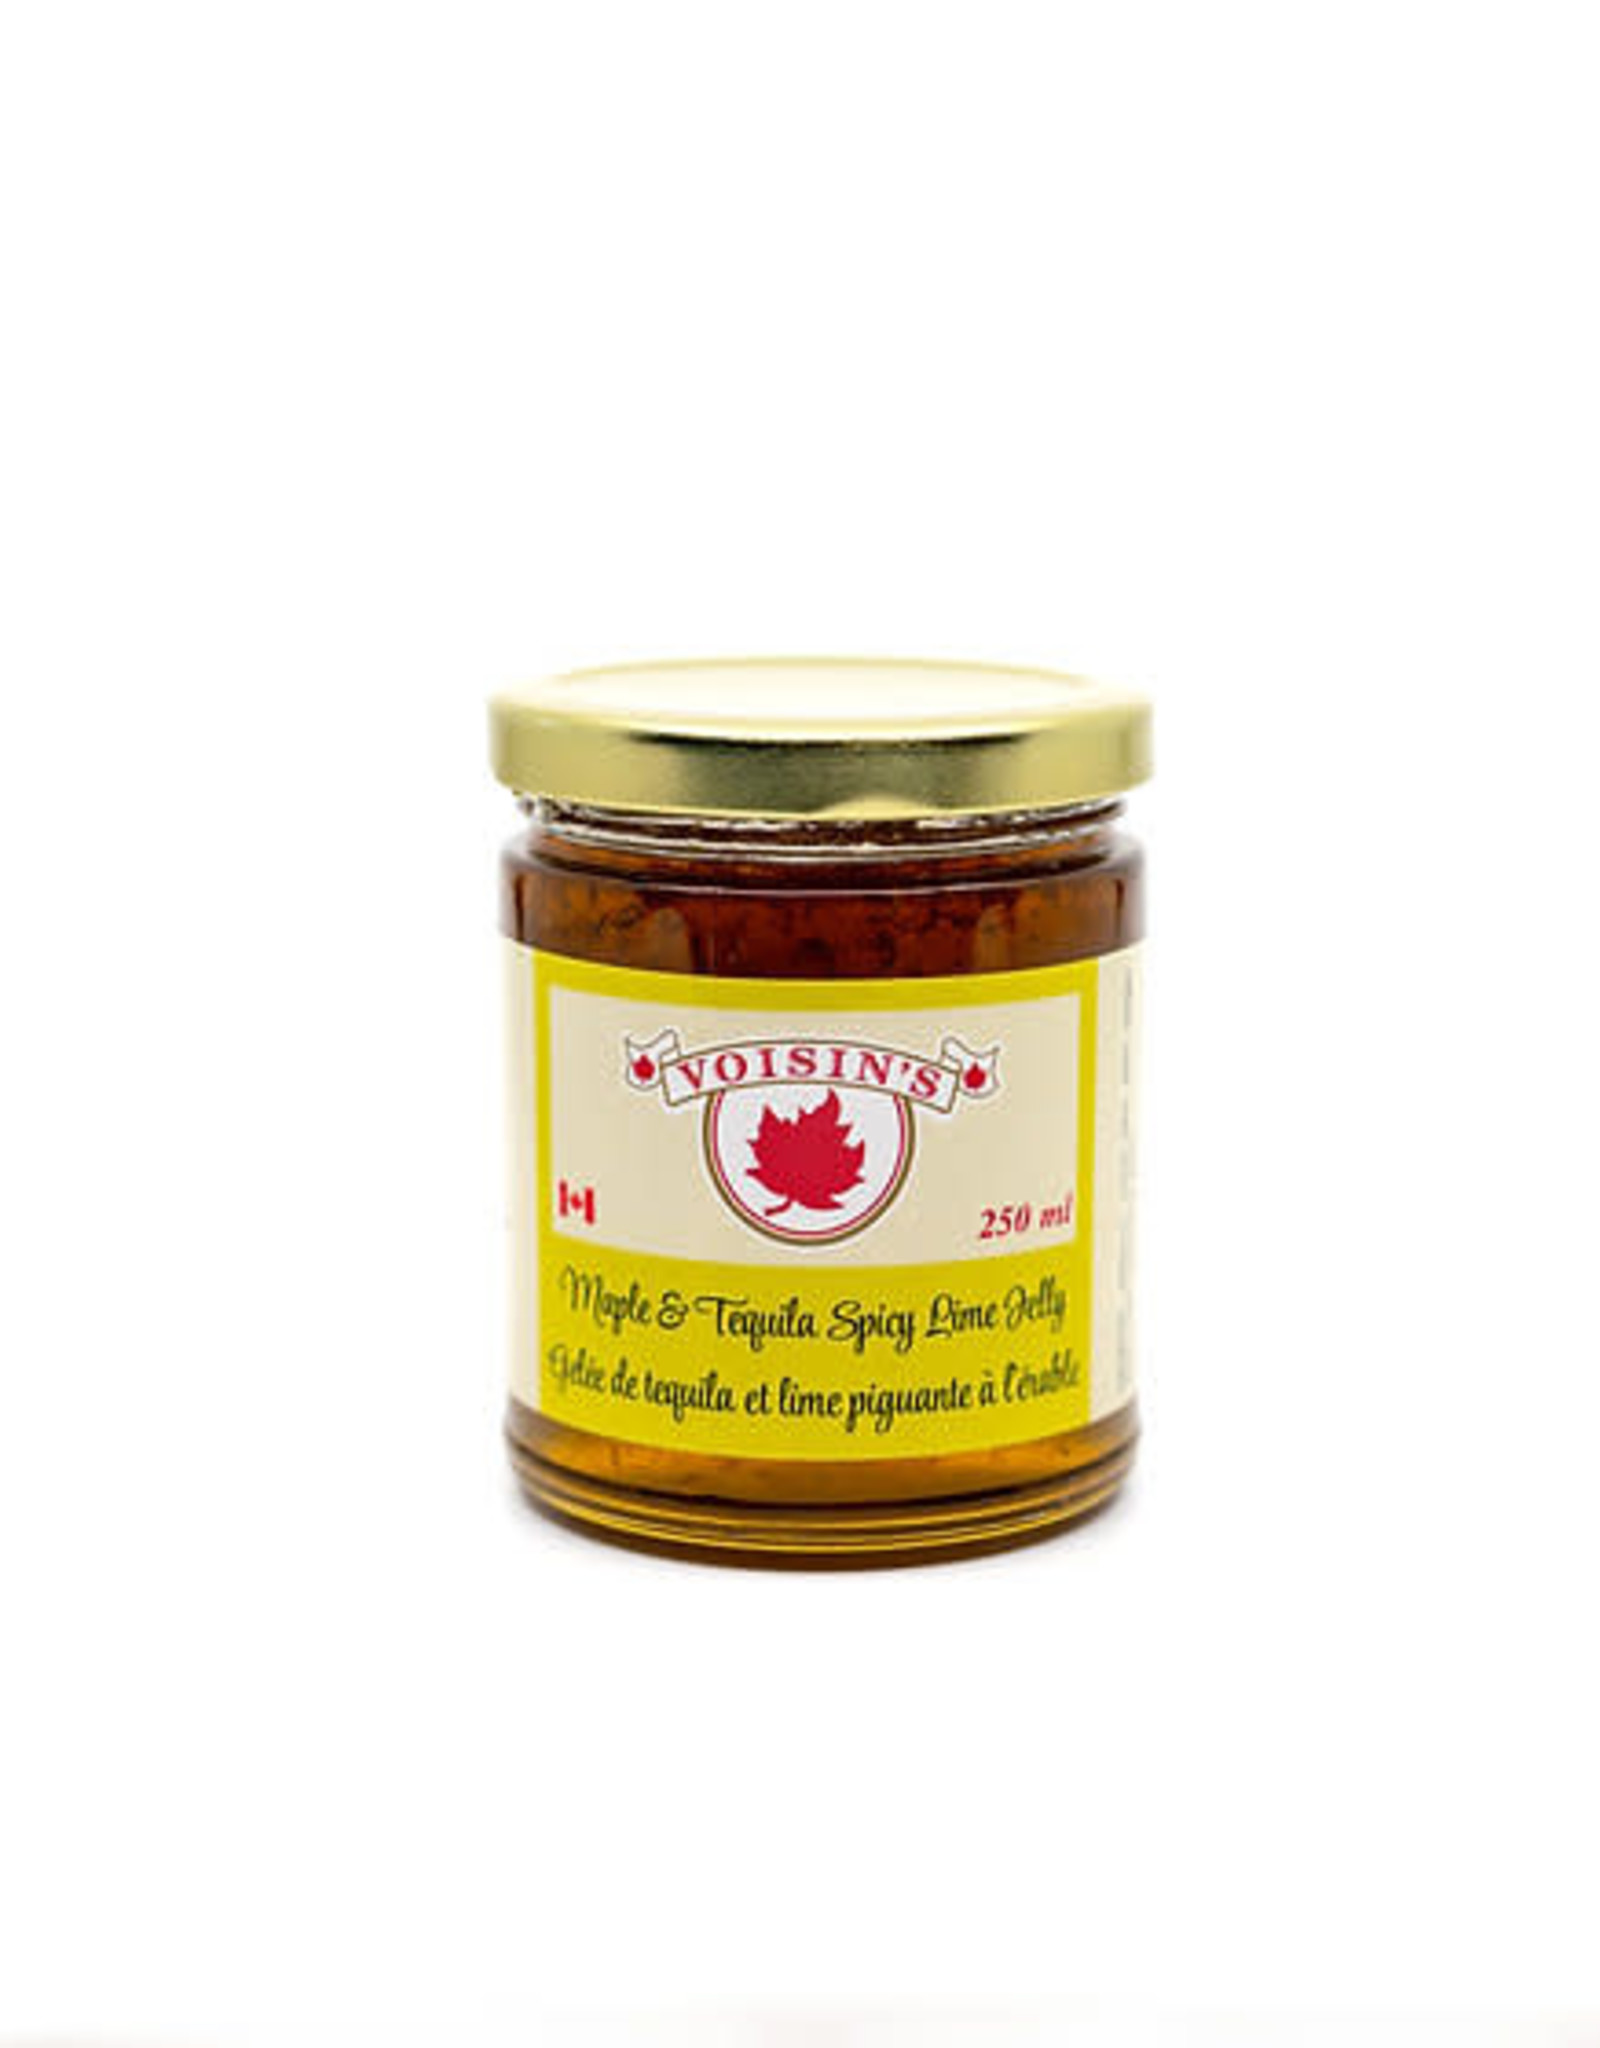 Voisins Maple & Tequila Spicy Lime Jelly